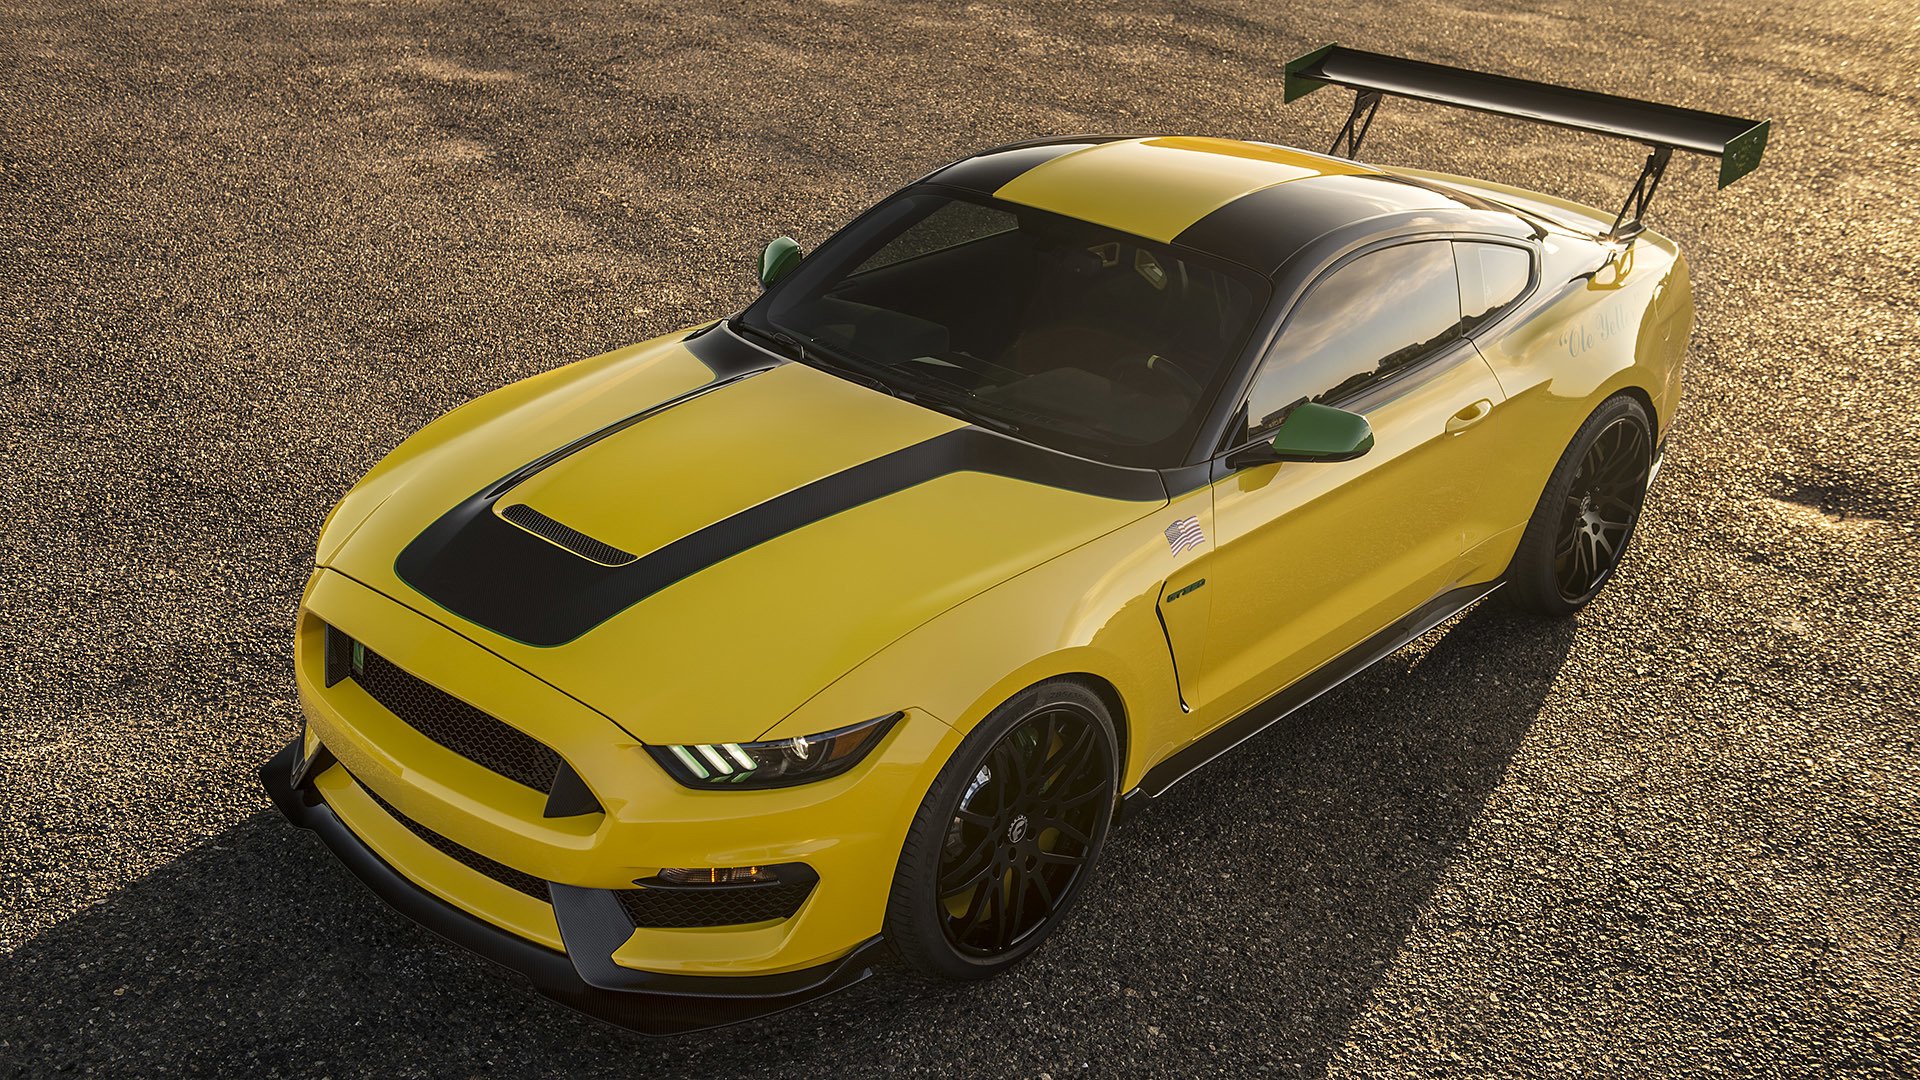 ford, Shellby, Gt 350, Builds, Wild, P 51, Inspired, Mustang, Cars, Yellow, 201 Wallpaper